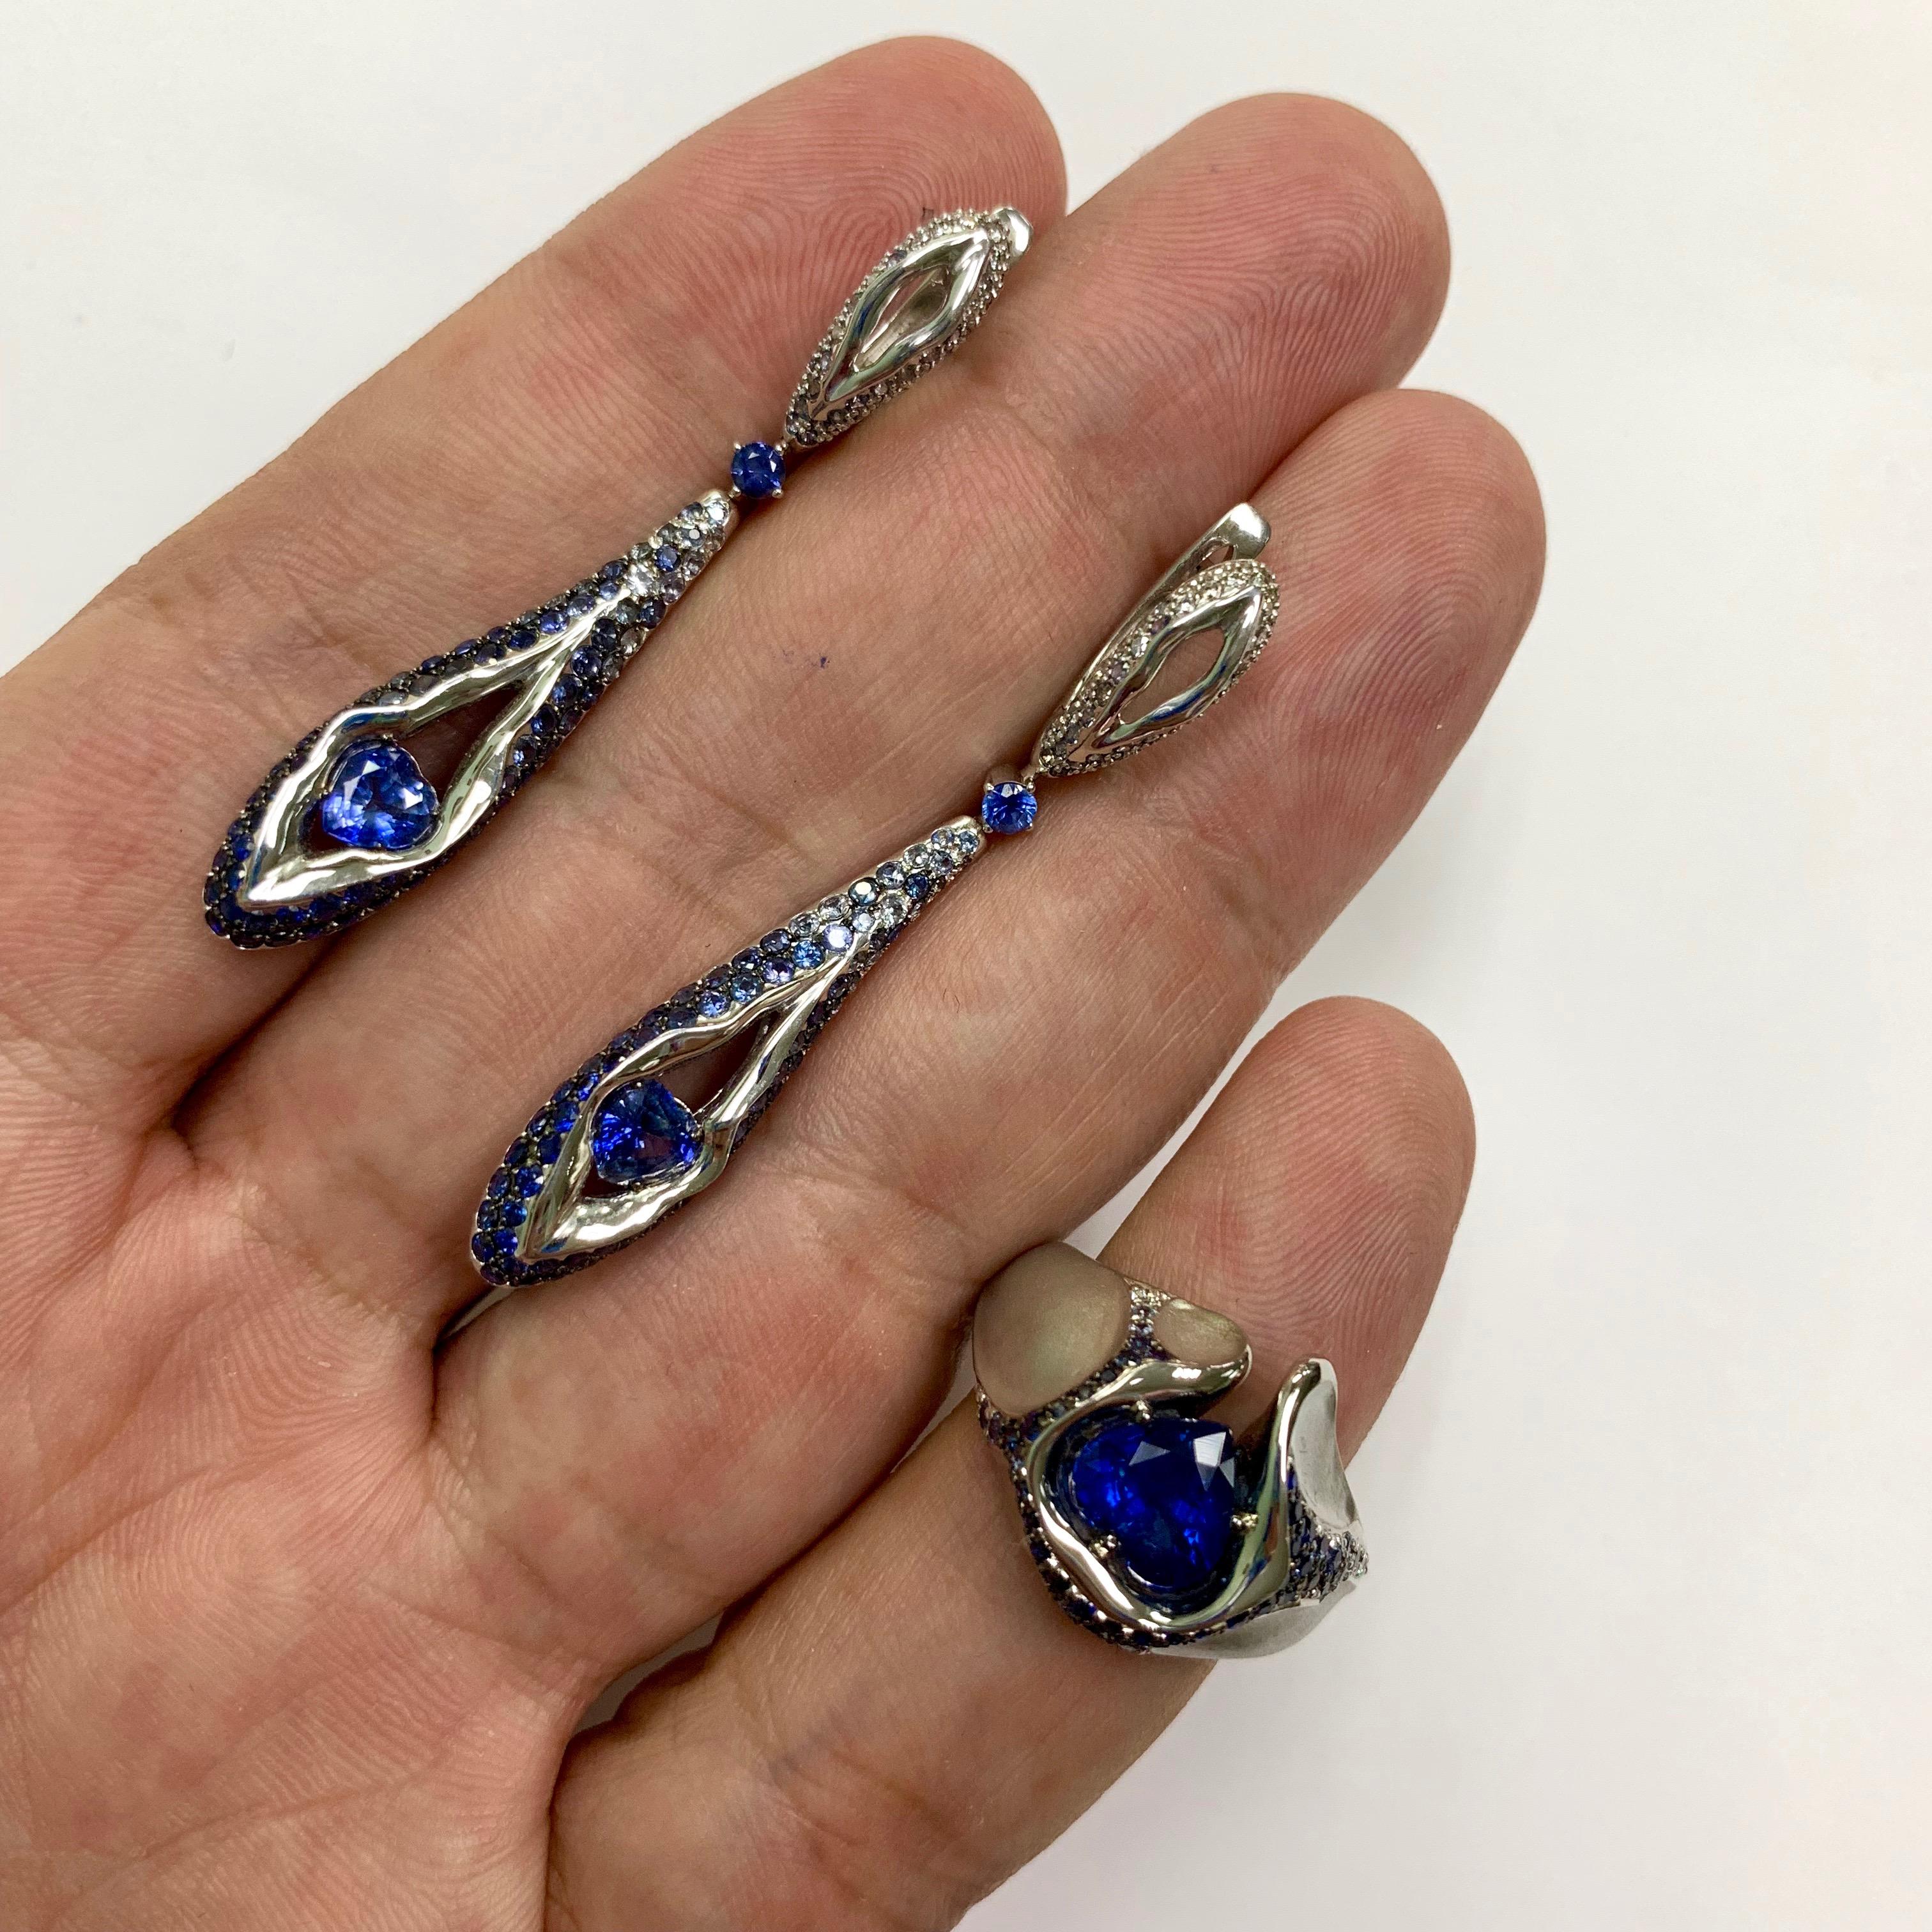 Sapphire Diamond 18 Karat White Gold HeartBeat Ring Earrings Suite
White 18K matte and glossy Gold looks like a rock cracked from strong blows, through which a Blue heart-shaped Sapphire makes its way out. From the central stone there are cracks in